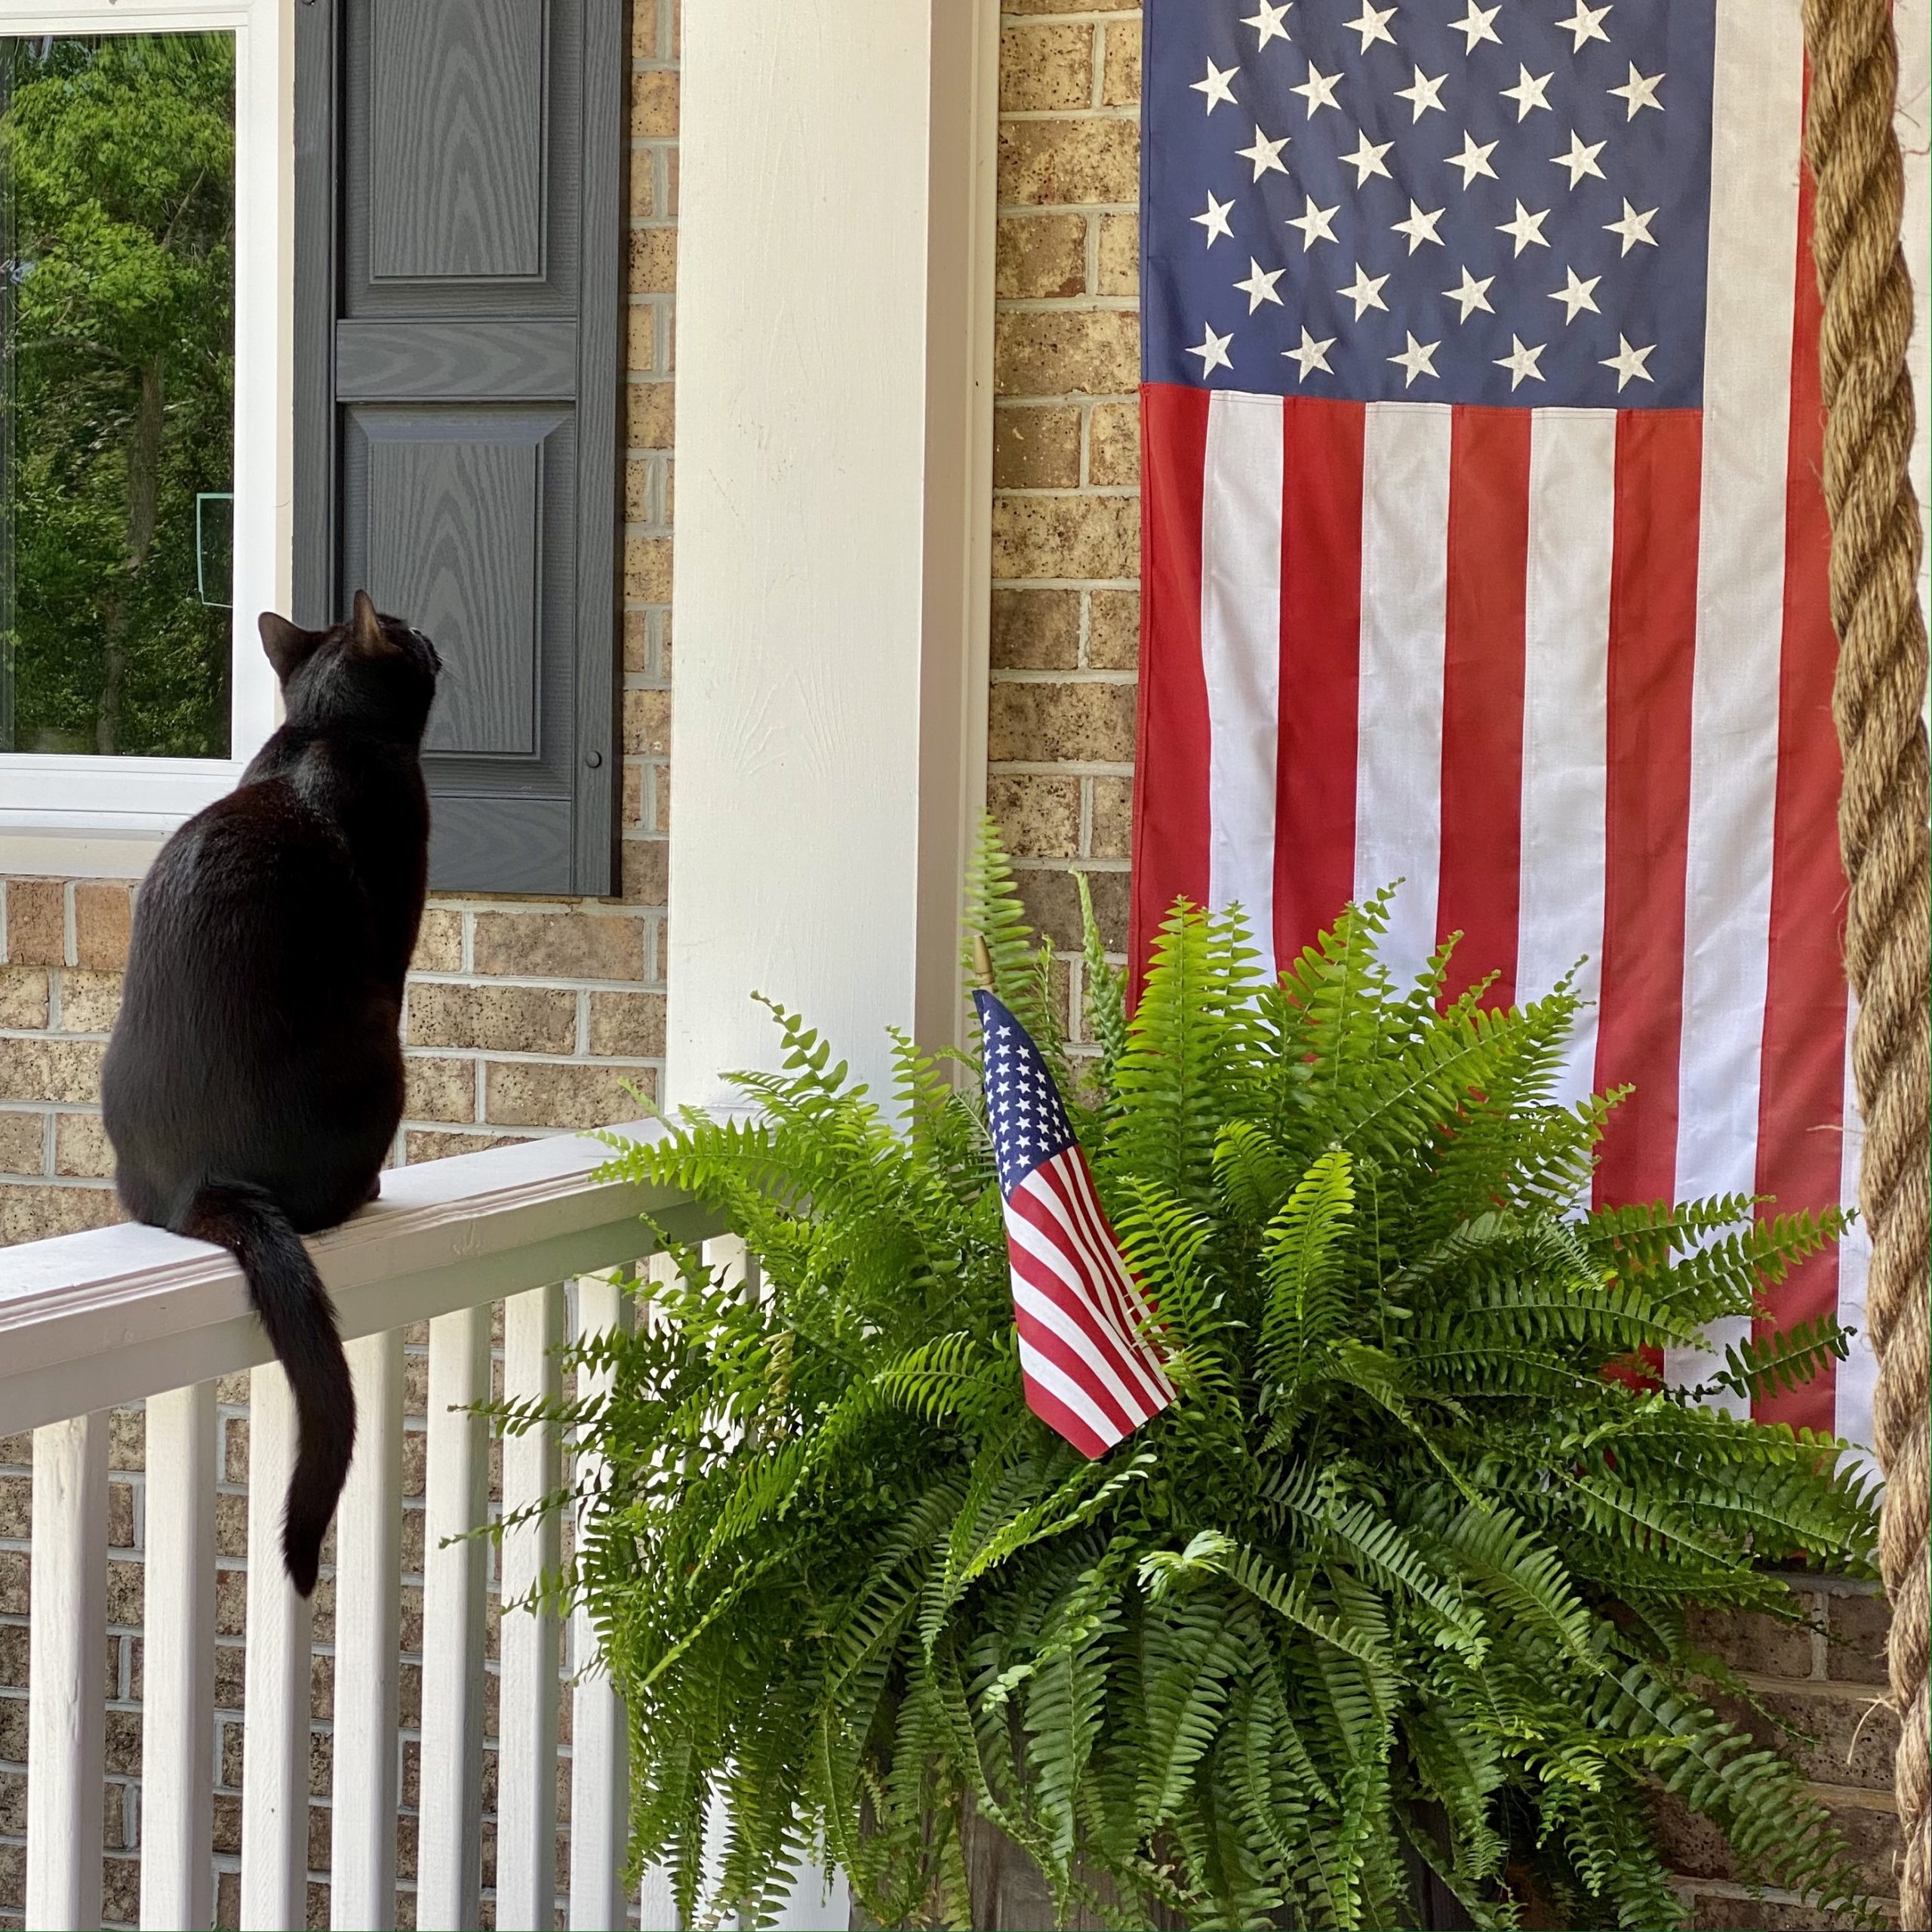 Black cat sitting on the front porch railing looking up at the American flag hanging on the wall.